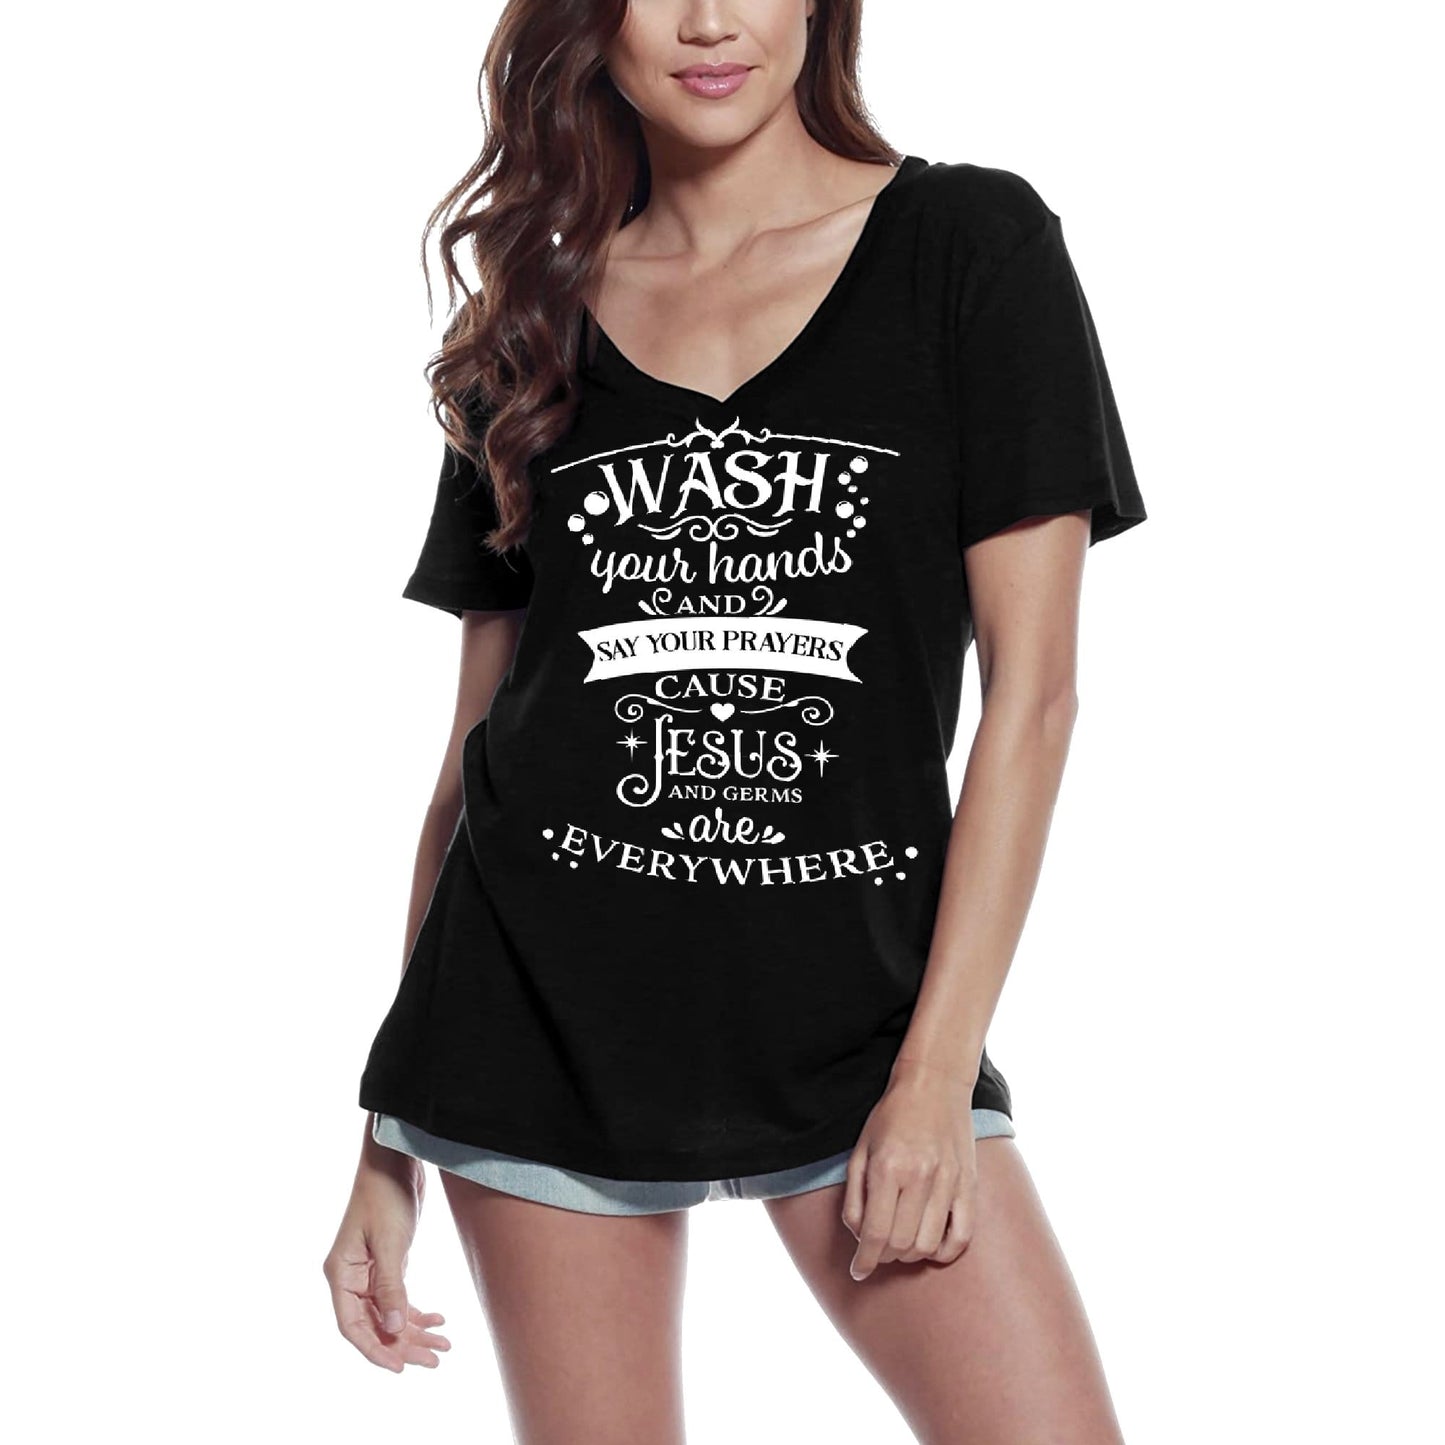 ULTRABASIC Women's T-Shirt Wash You Hands and Say Your Prayers Tee Shirt Tops